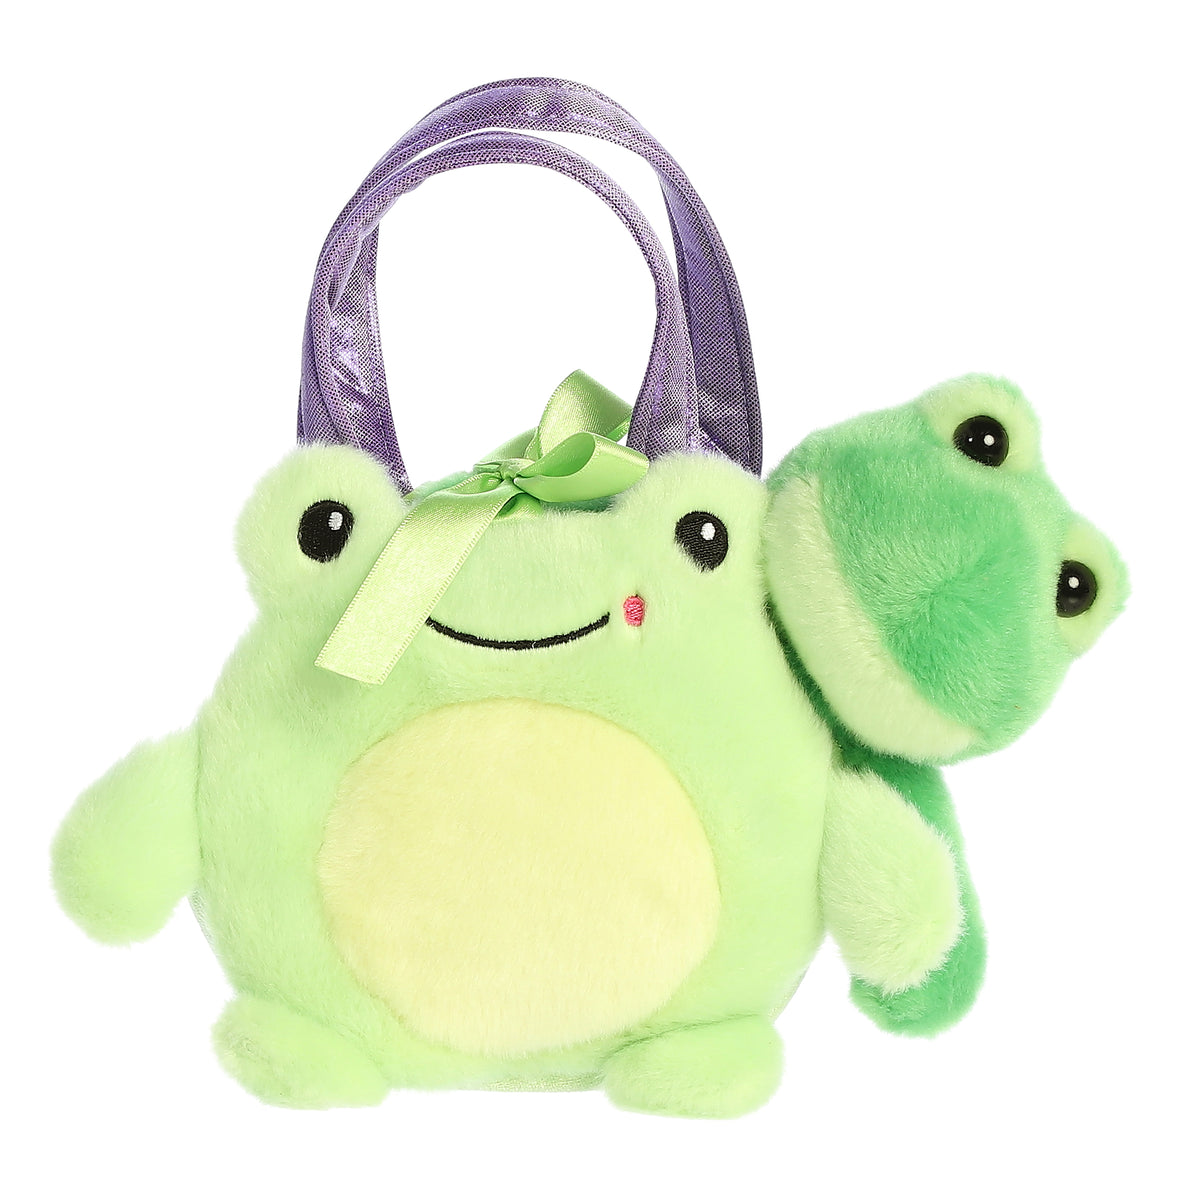 Vibrant green frog plush carrier by Aurora with light belly and striking purple straps, ready for a hoppy adventure.